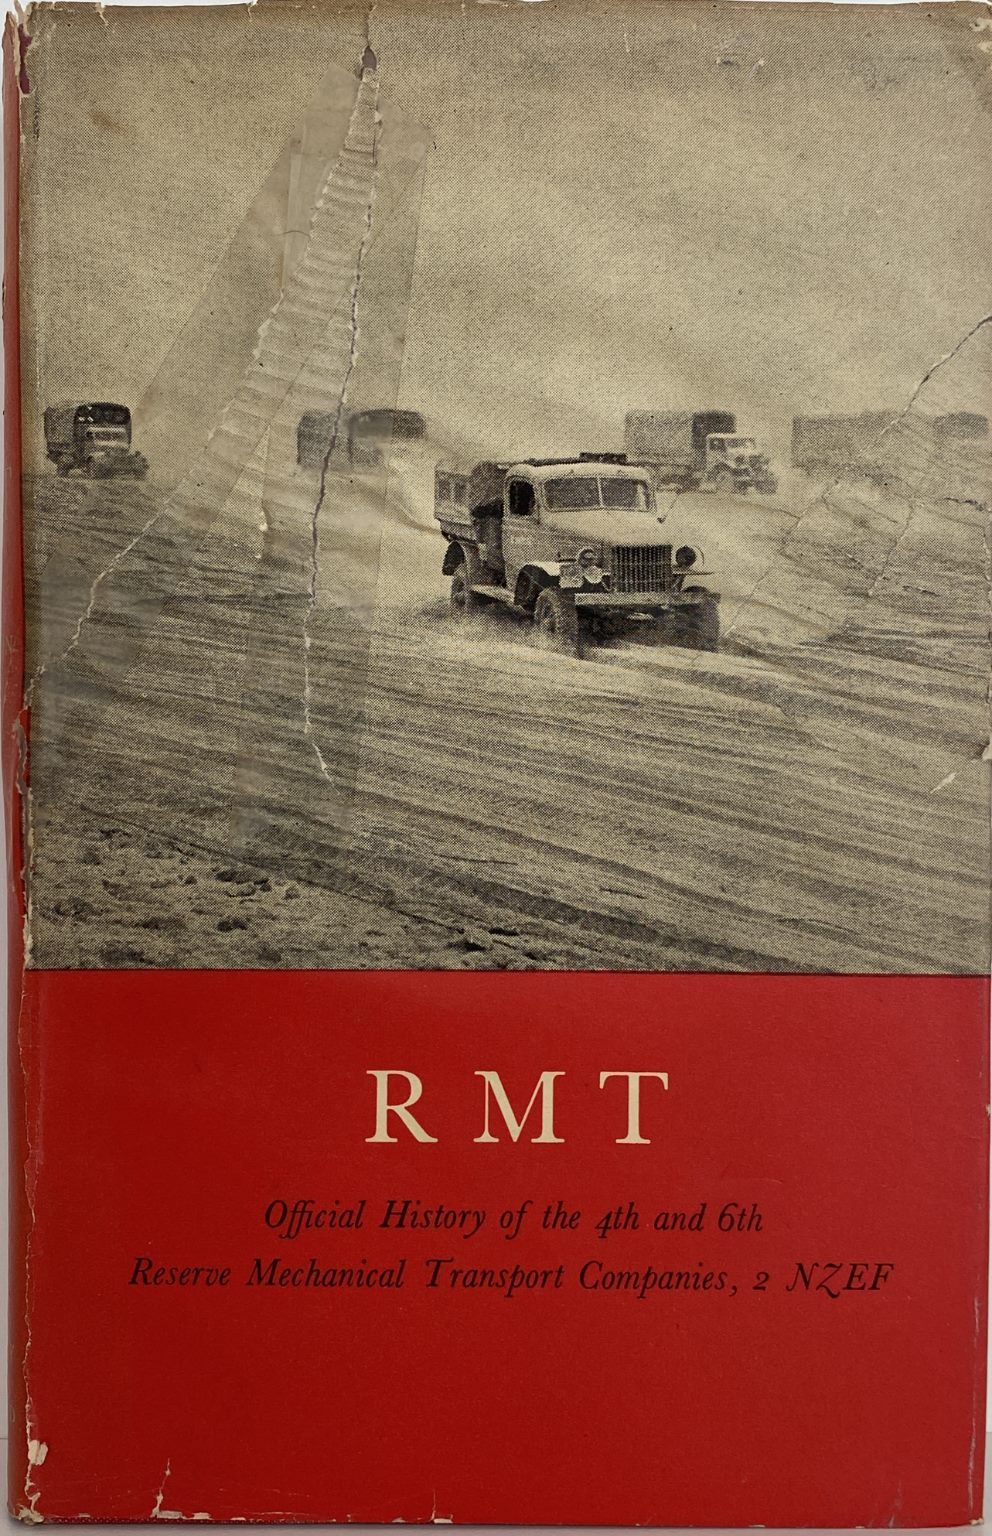 RMT: History of 4th and 6th Reserve Mechanical Transport Companies 2 NZEF